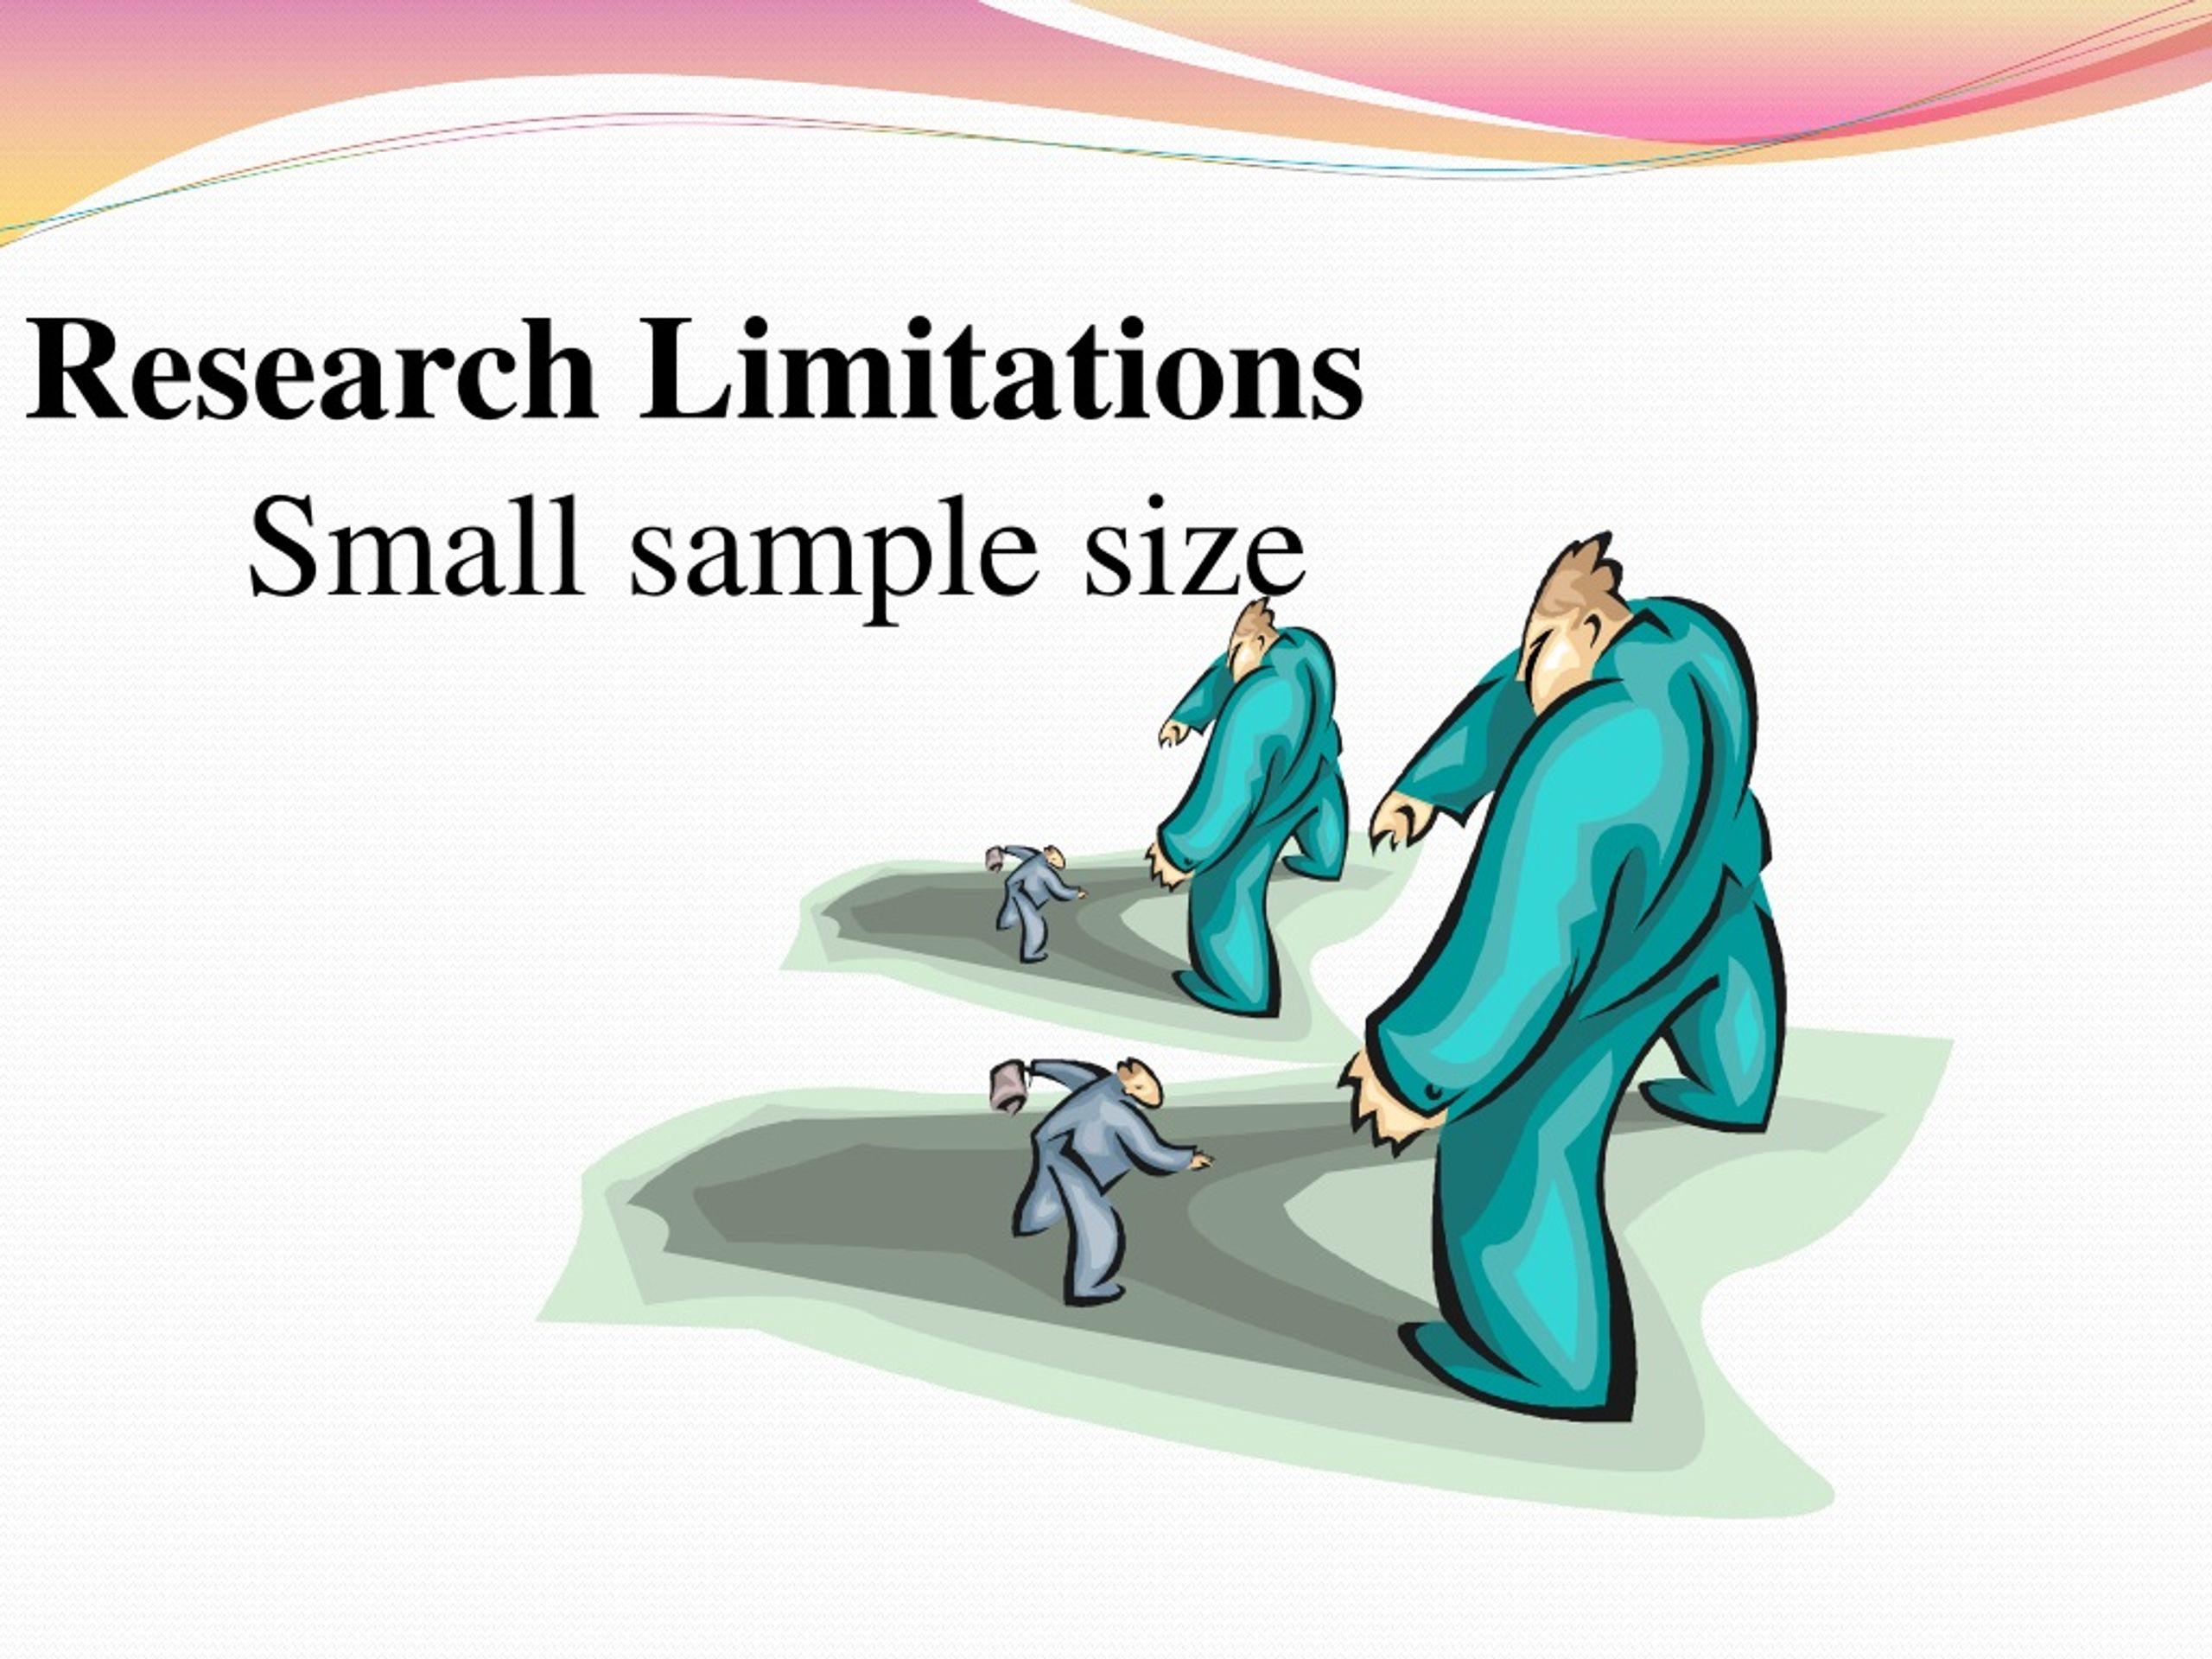 limitations of research small sample size